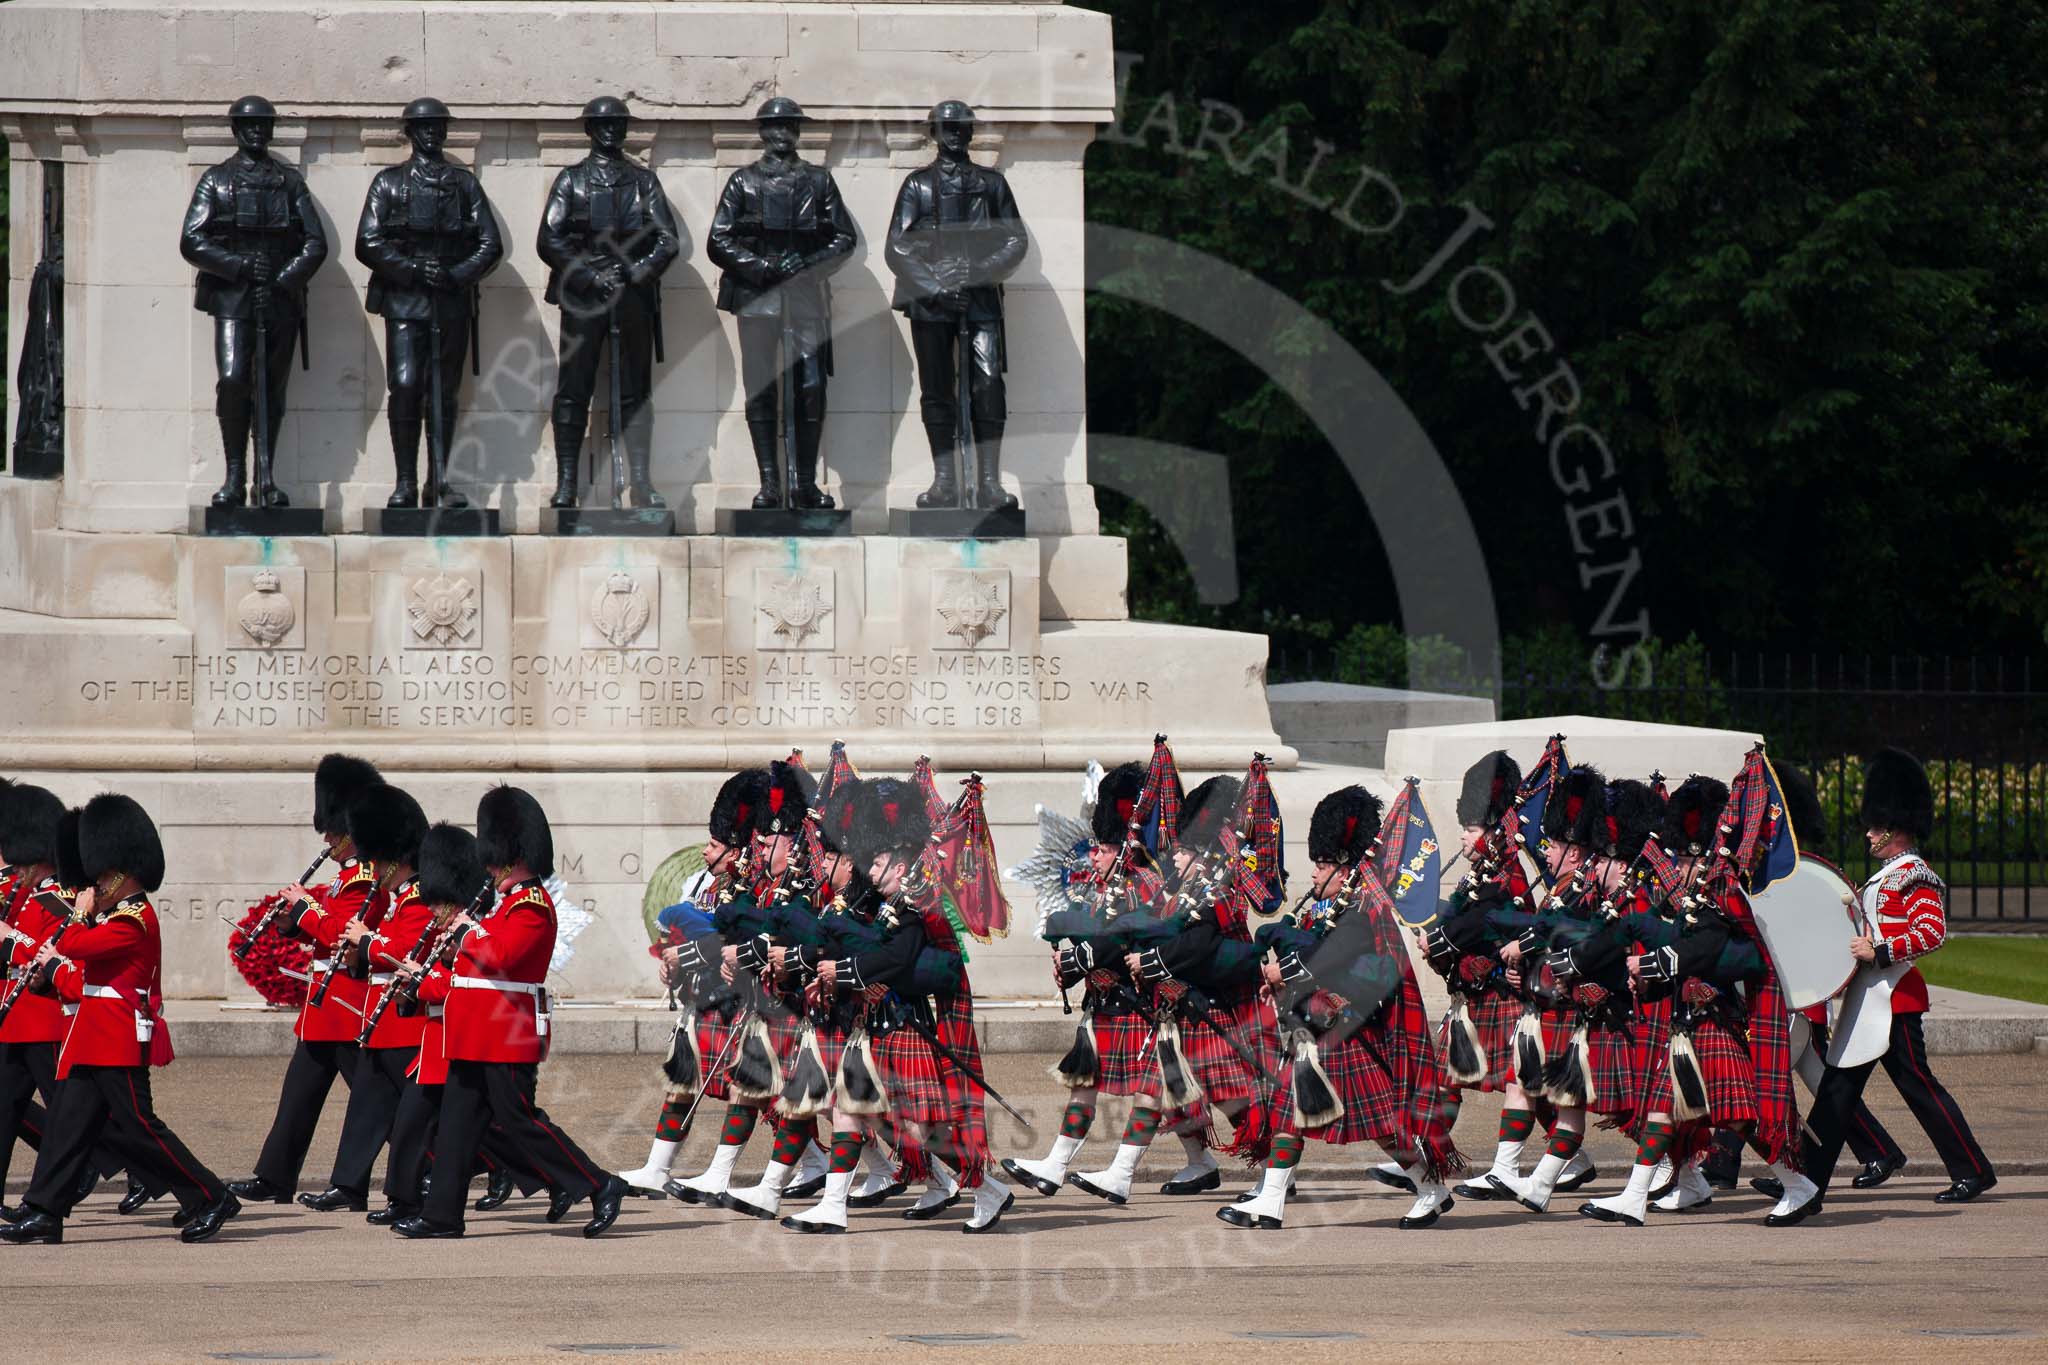 Trooping the Colour 2009: The Band of the Scots Guards, with their pipers in Royal Stewart Tartan, marching along the Guards Memorial..
Horse Guards Parade, Westminster,
London SW1,

United Kingdom,
on 13 June 2009 at 10:24, image #42